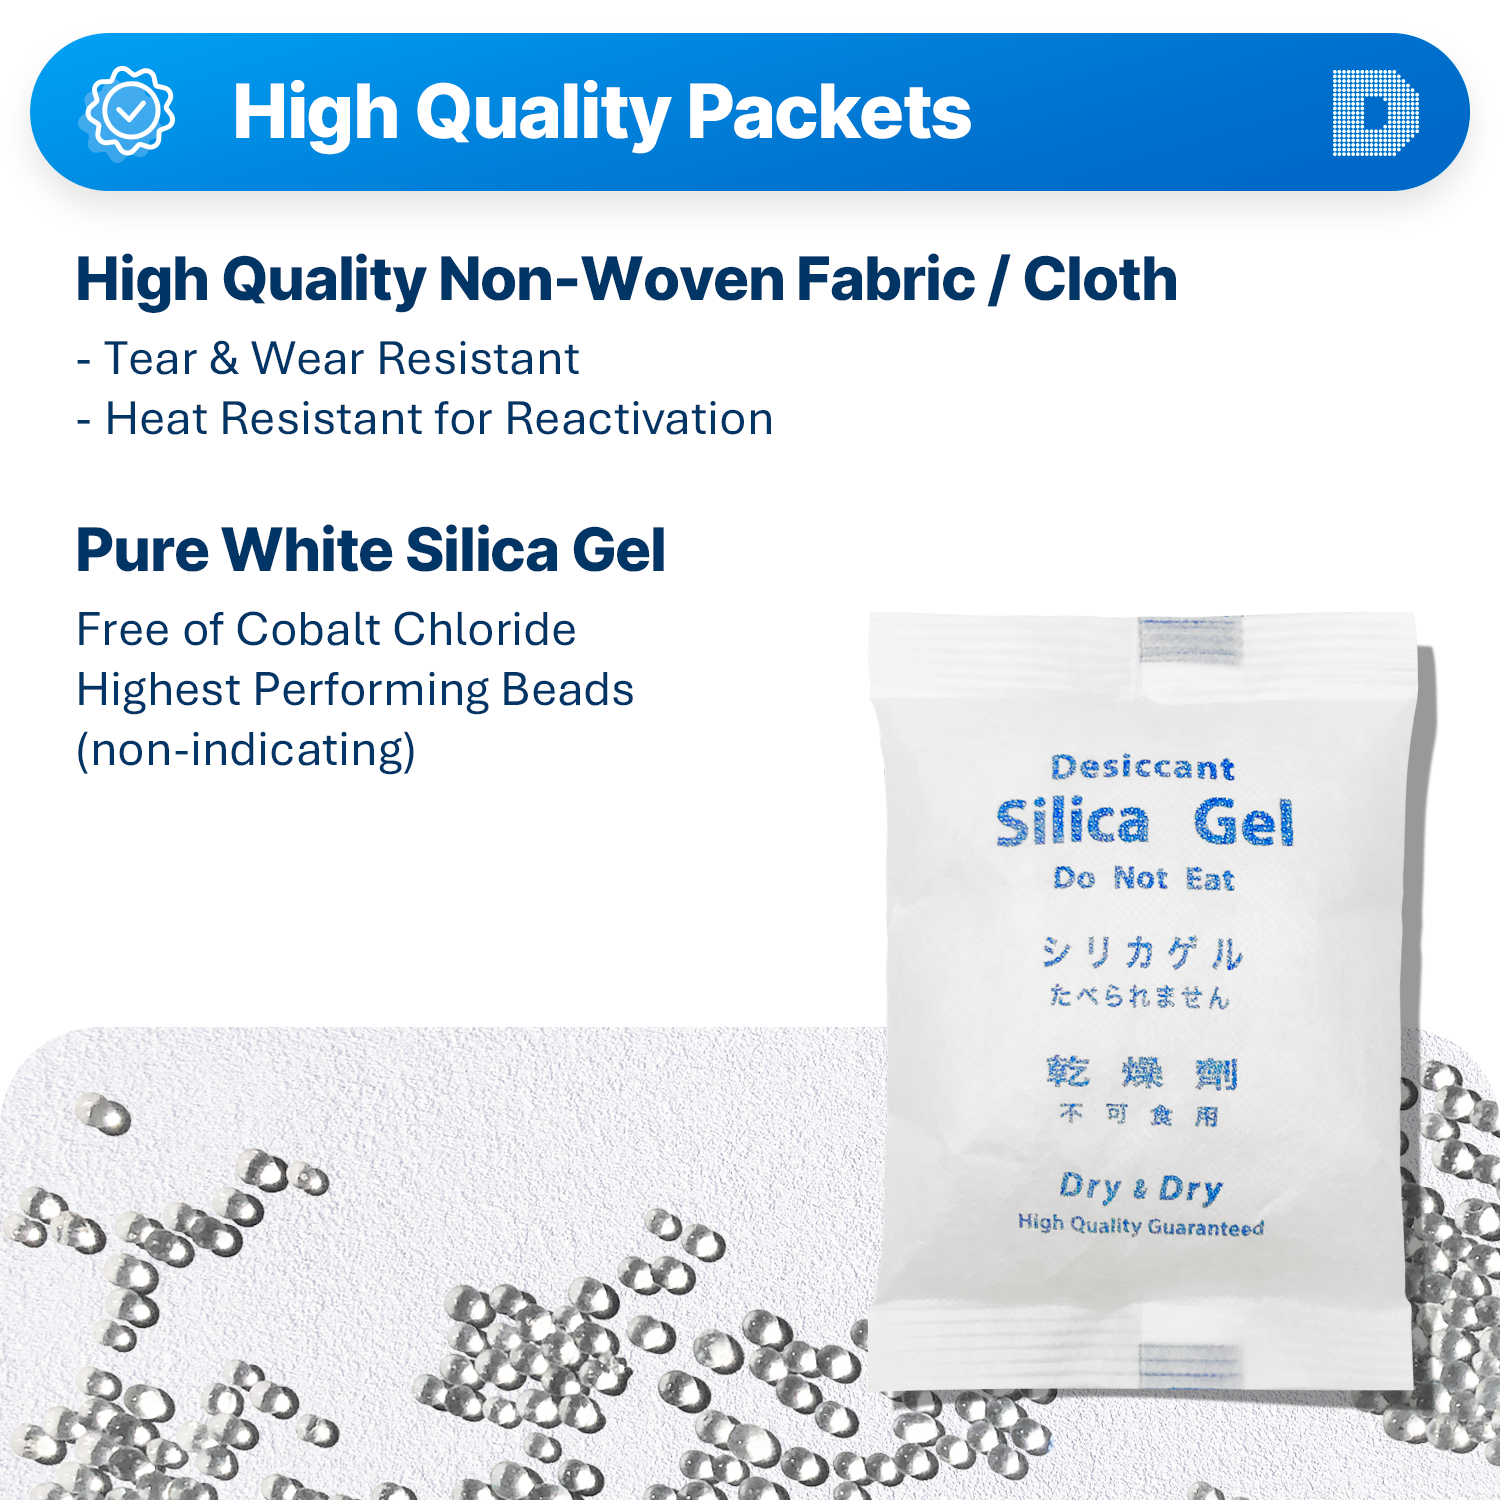 200 Gram [100 Packets]  "Dry & Dry" Premium Silica Gel Desiccant Packets - Rechargeable Non-Woven Fabric (Cloth)